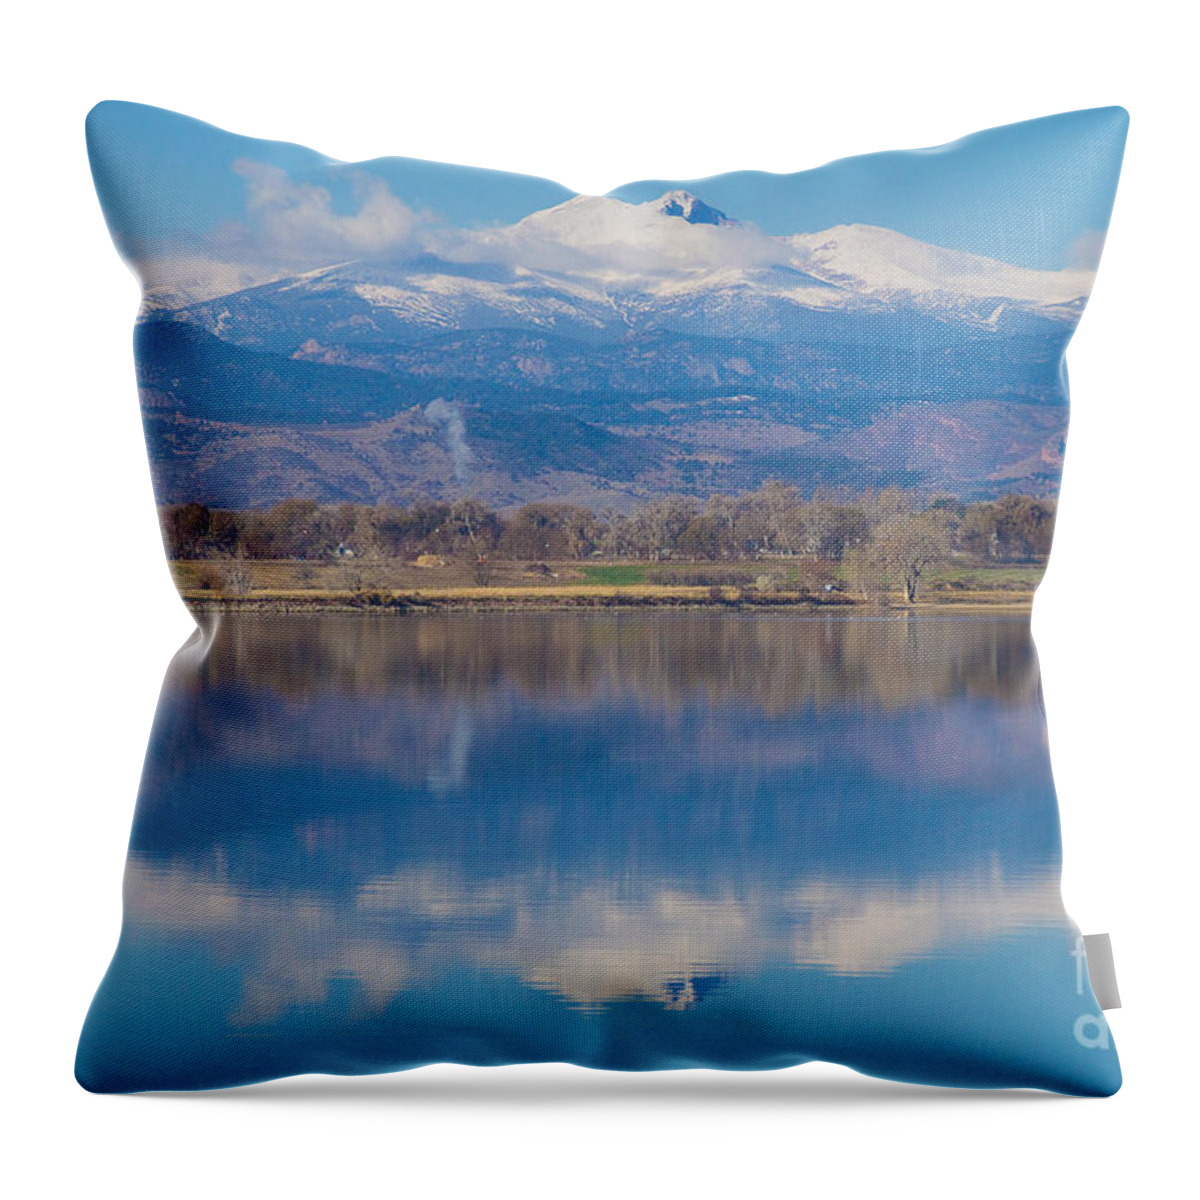 'longs Peak' Longs Peak Co' Throw Pillow featuring the photograph Colorado Longs Peak Circling Clouds Reflection by James BO Insogna